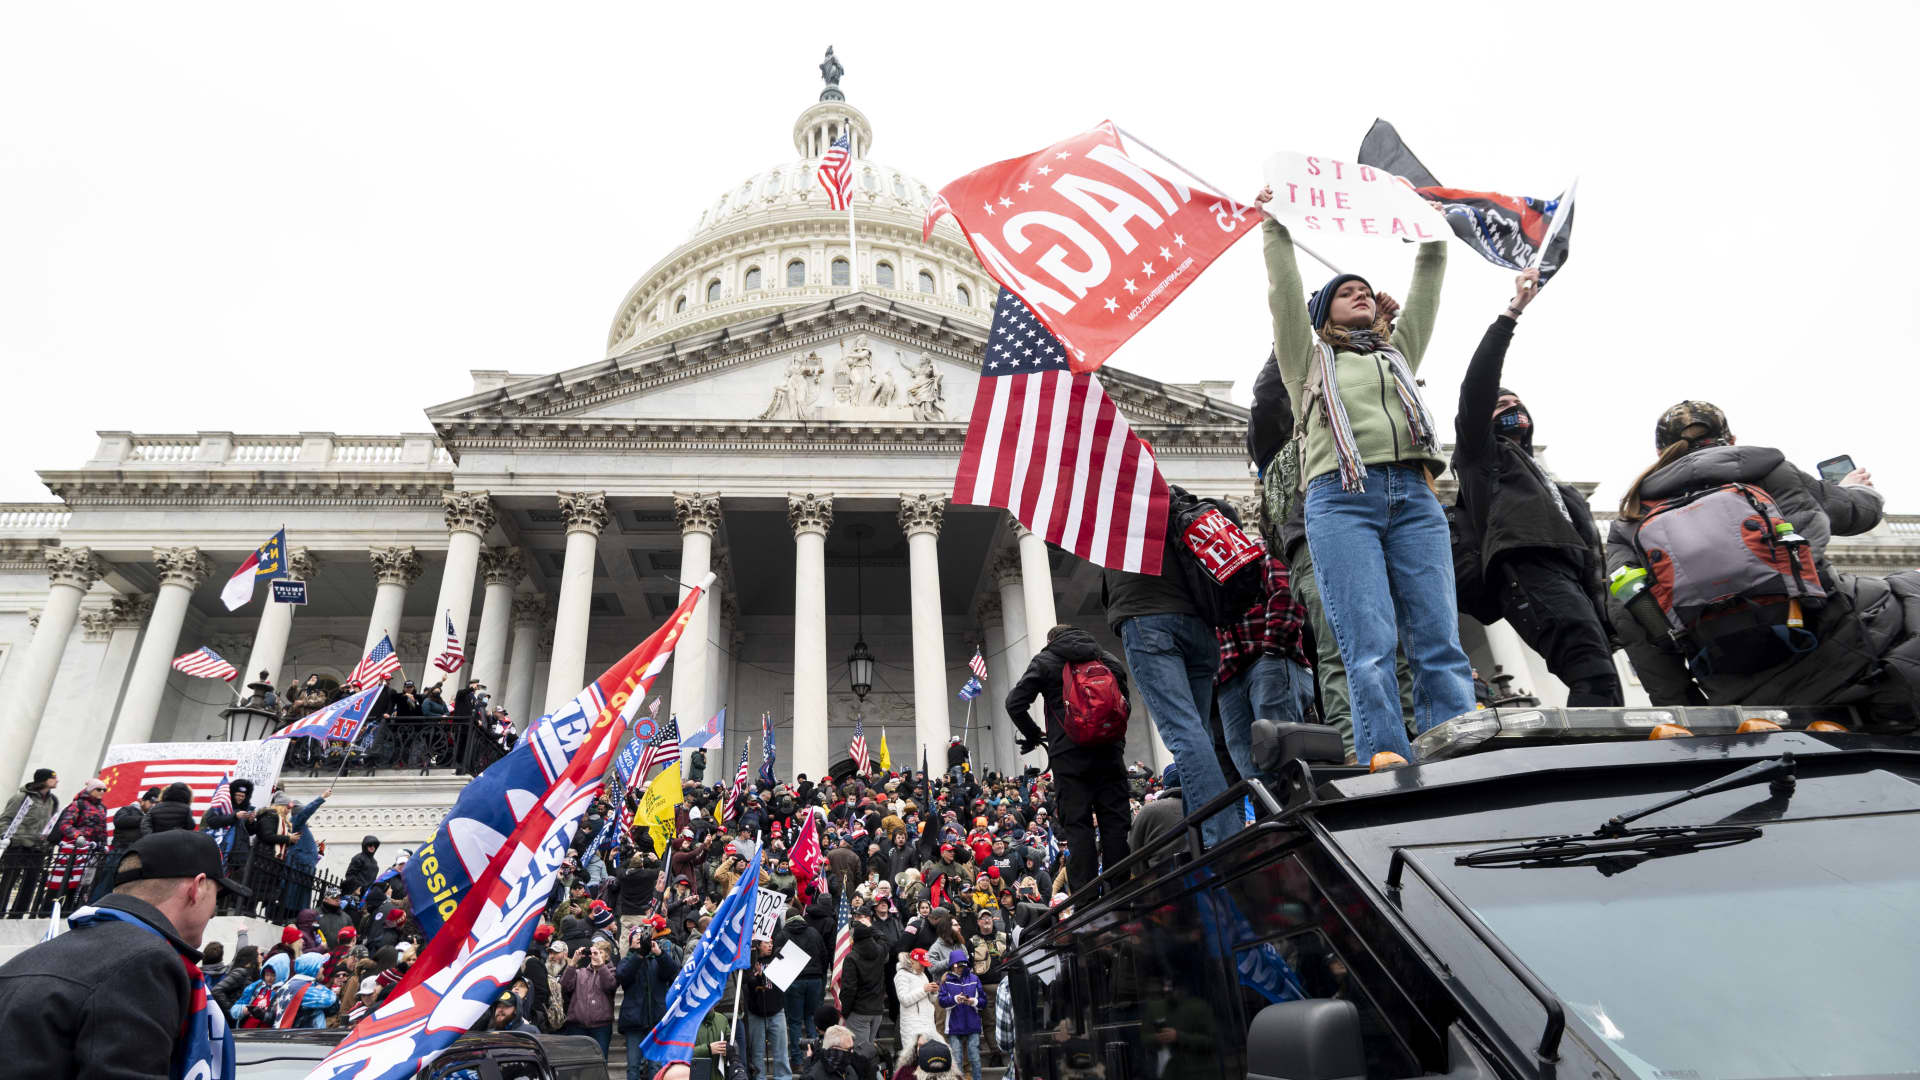 Trump supporters stand on the U.S. Capitol Police armored vehicle as others take over the steps of the Capitol on Wednesday, Jan. 6, 2021, as the Congress works to certify the electoral college votes.